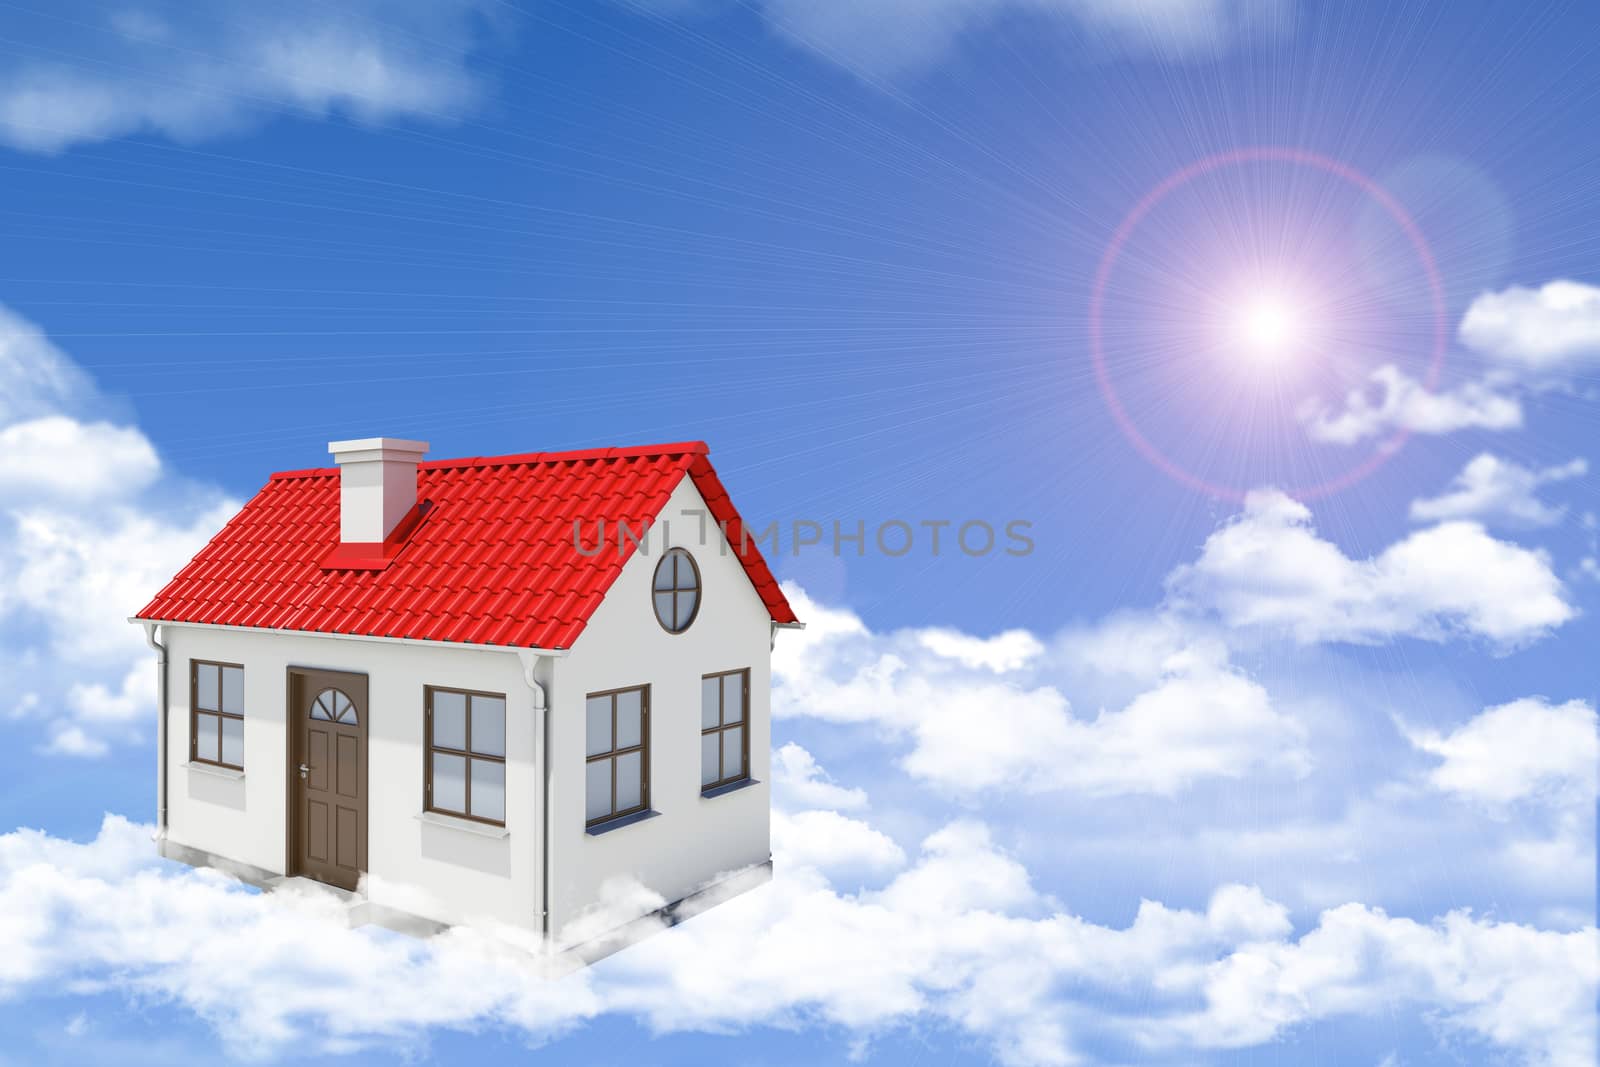 White house with red gable roof, brown door and chimney floating in clouds. Background sun shines brightly. Blue sky